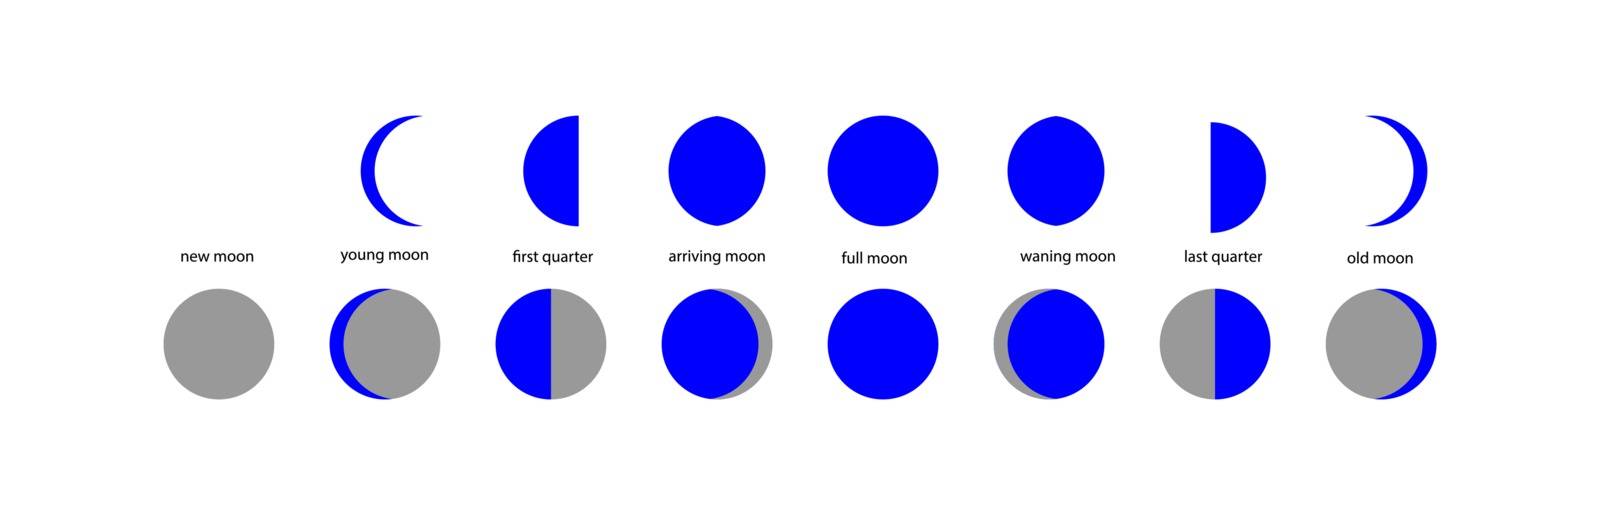 Set of simple illustrations of moon phases with text explanation 